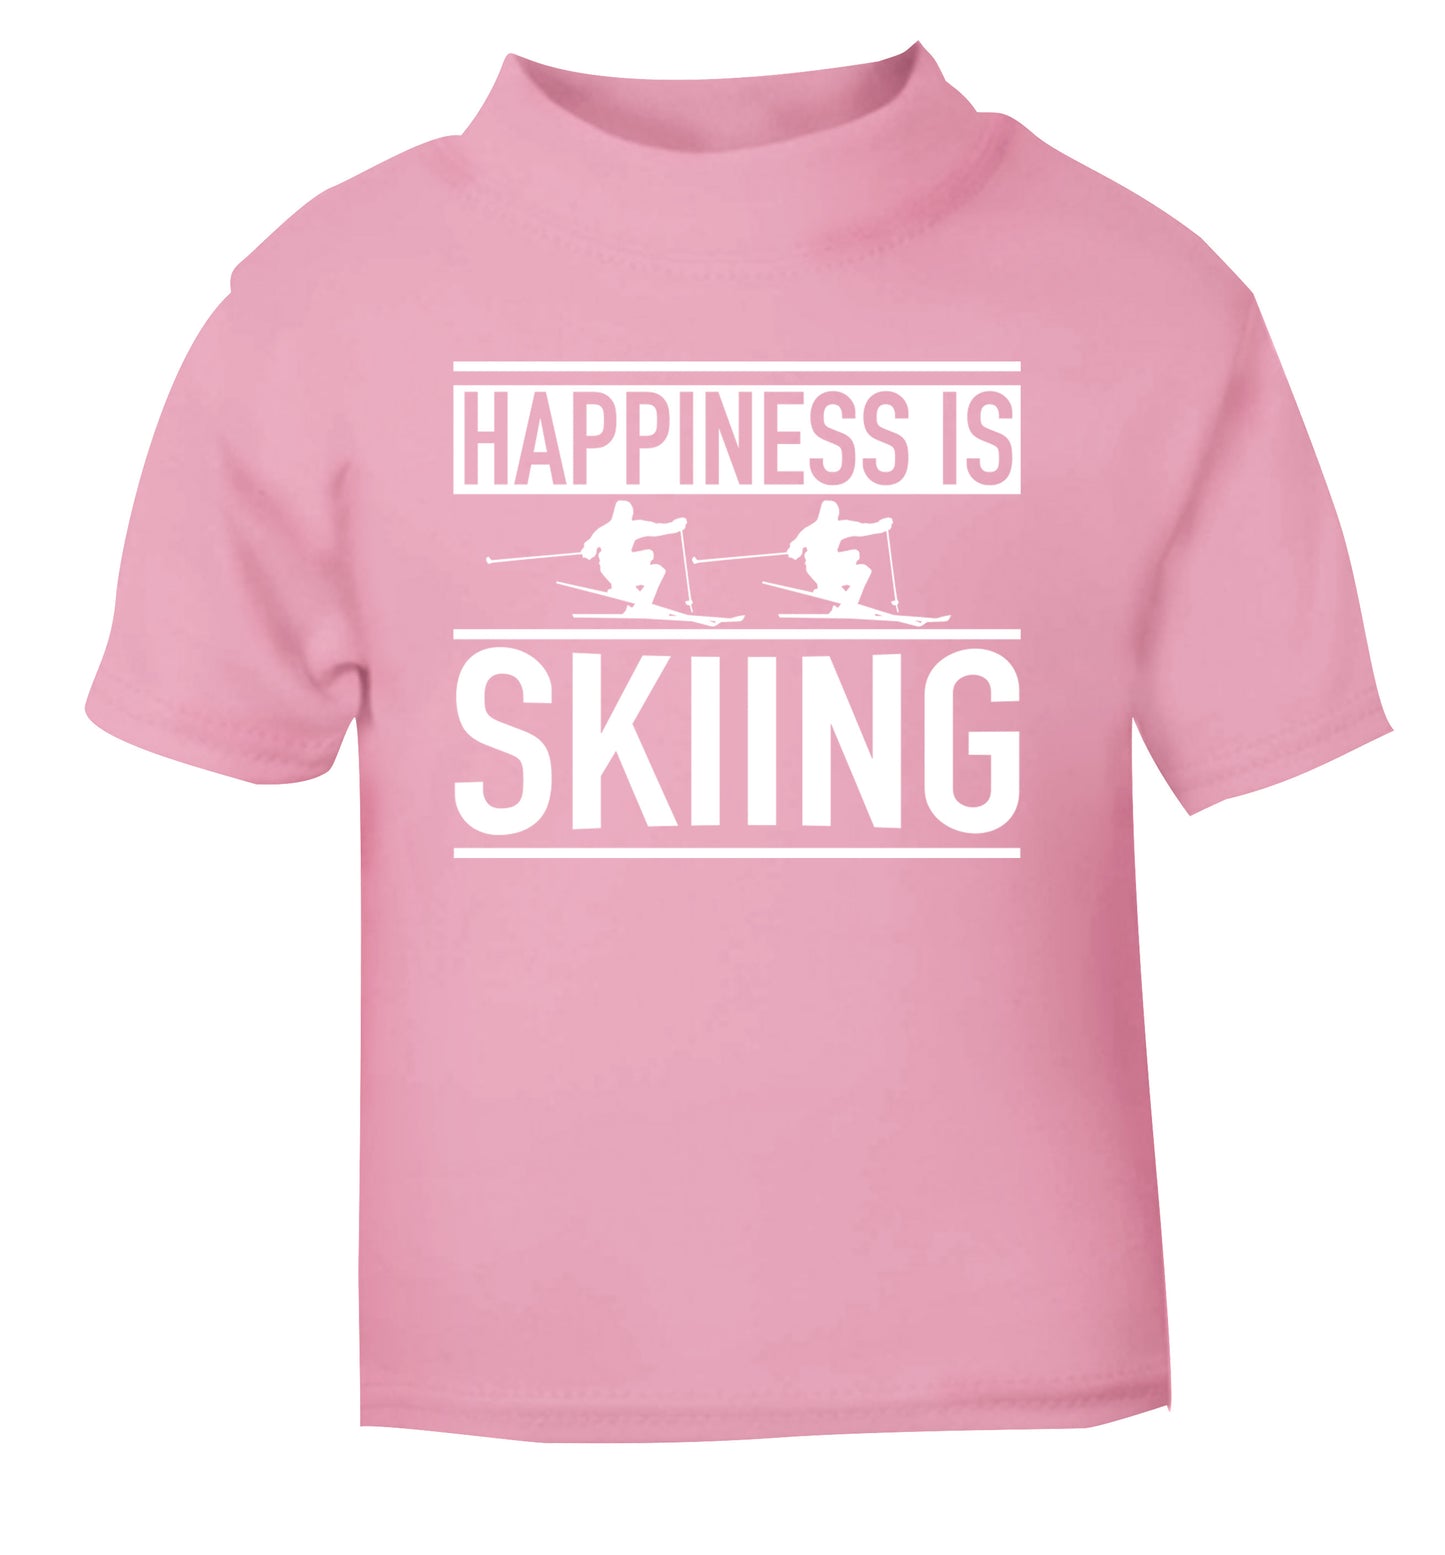 Happiness is skiing light pink Baby Toddler Tshirt 2 Years